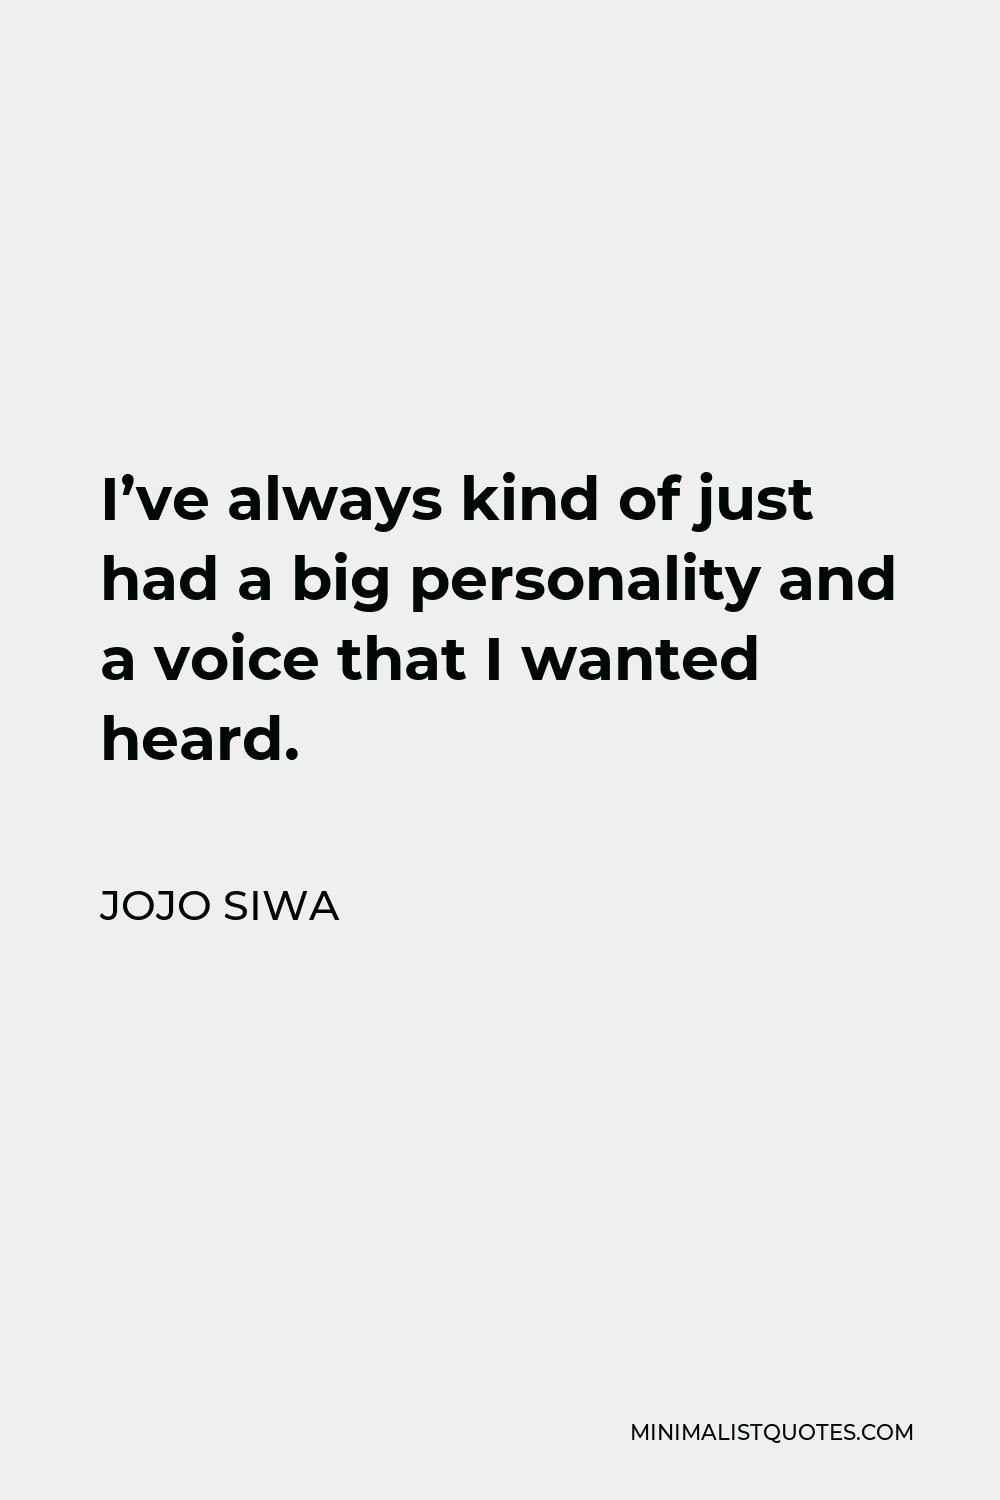 JoJo Siwa Quote - I’ve always kind of just had a big personality and a voice that I wanted heard.